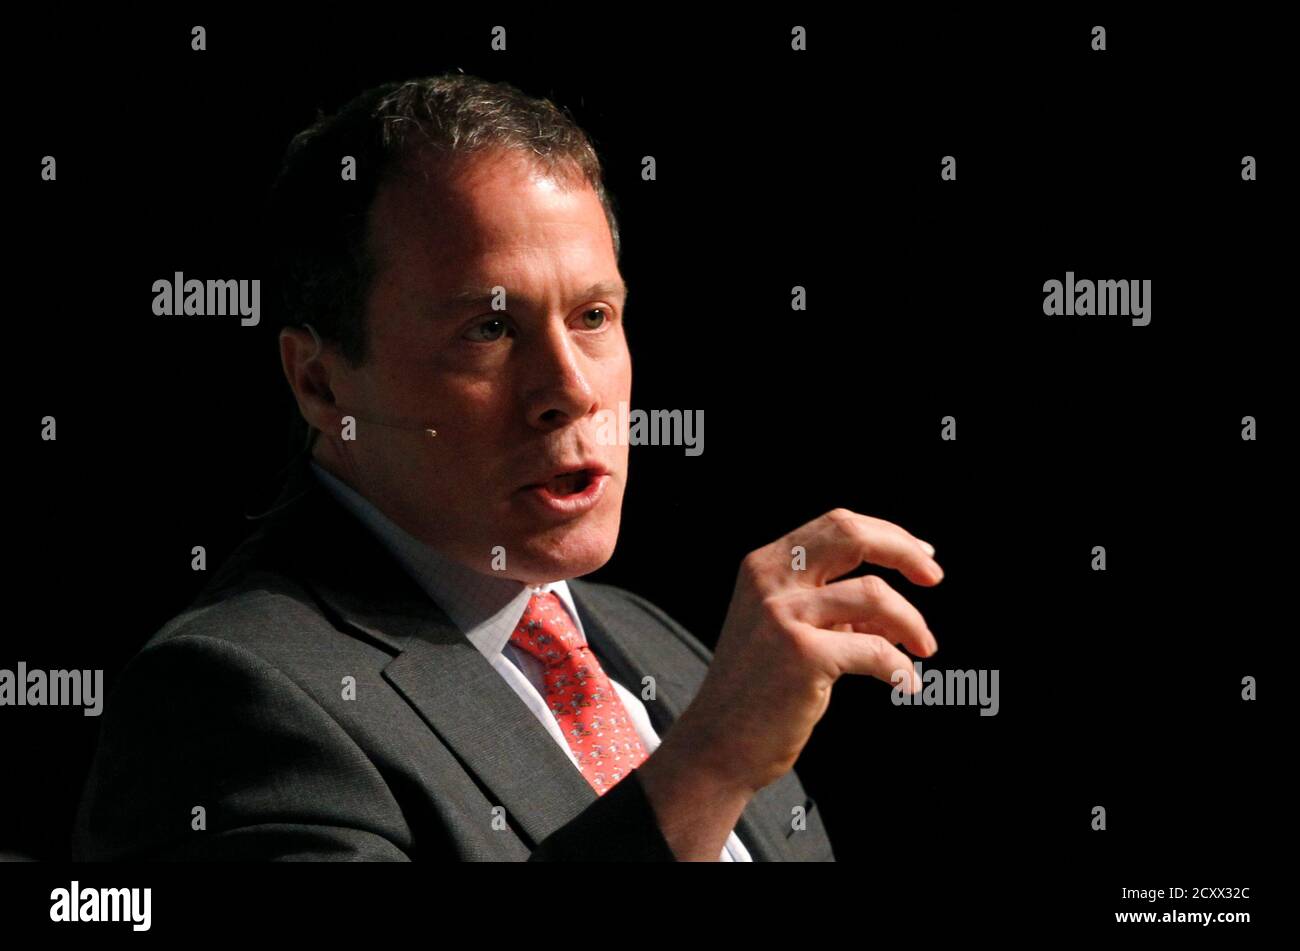 Paul Zummo, co-head and chief investment officer for JP Morgan Alternative Asset Management, participates in a panel discussion during the Skybridge Alternatives (SALT) Conference in Las Vegas, Nevada May 9, 2012. SALT brings together public policy officials, capital allocators, and hedge fund managers to discuss financial markets. REUTERS/Steve Marcus (UNITED STATES - Tags: BUSINESS) Stock Photo